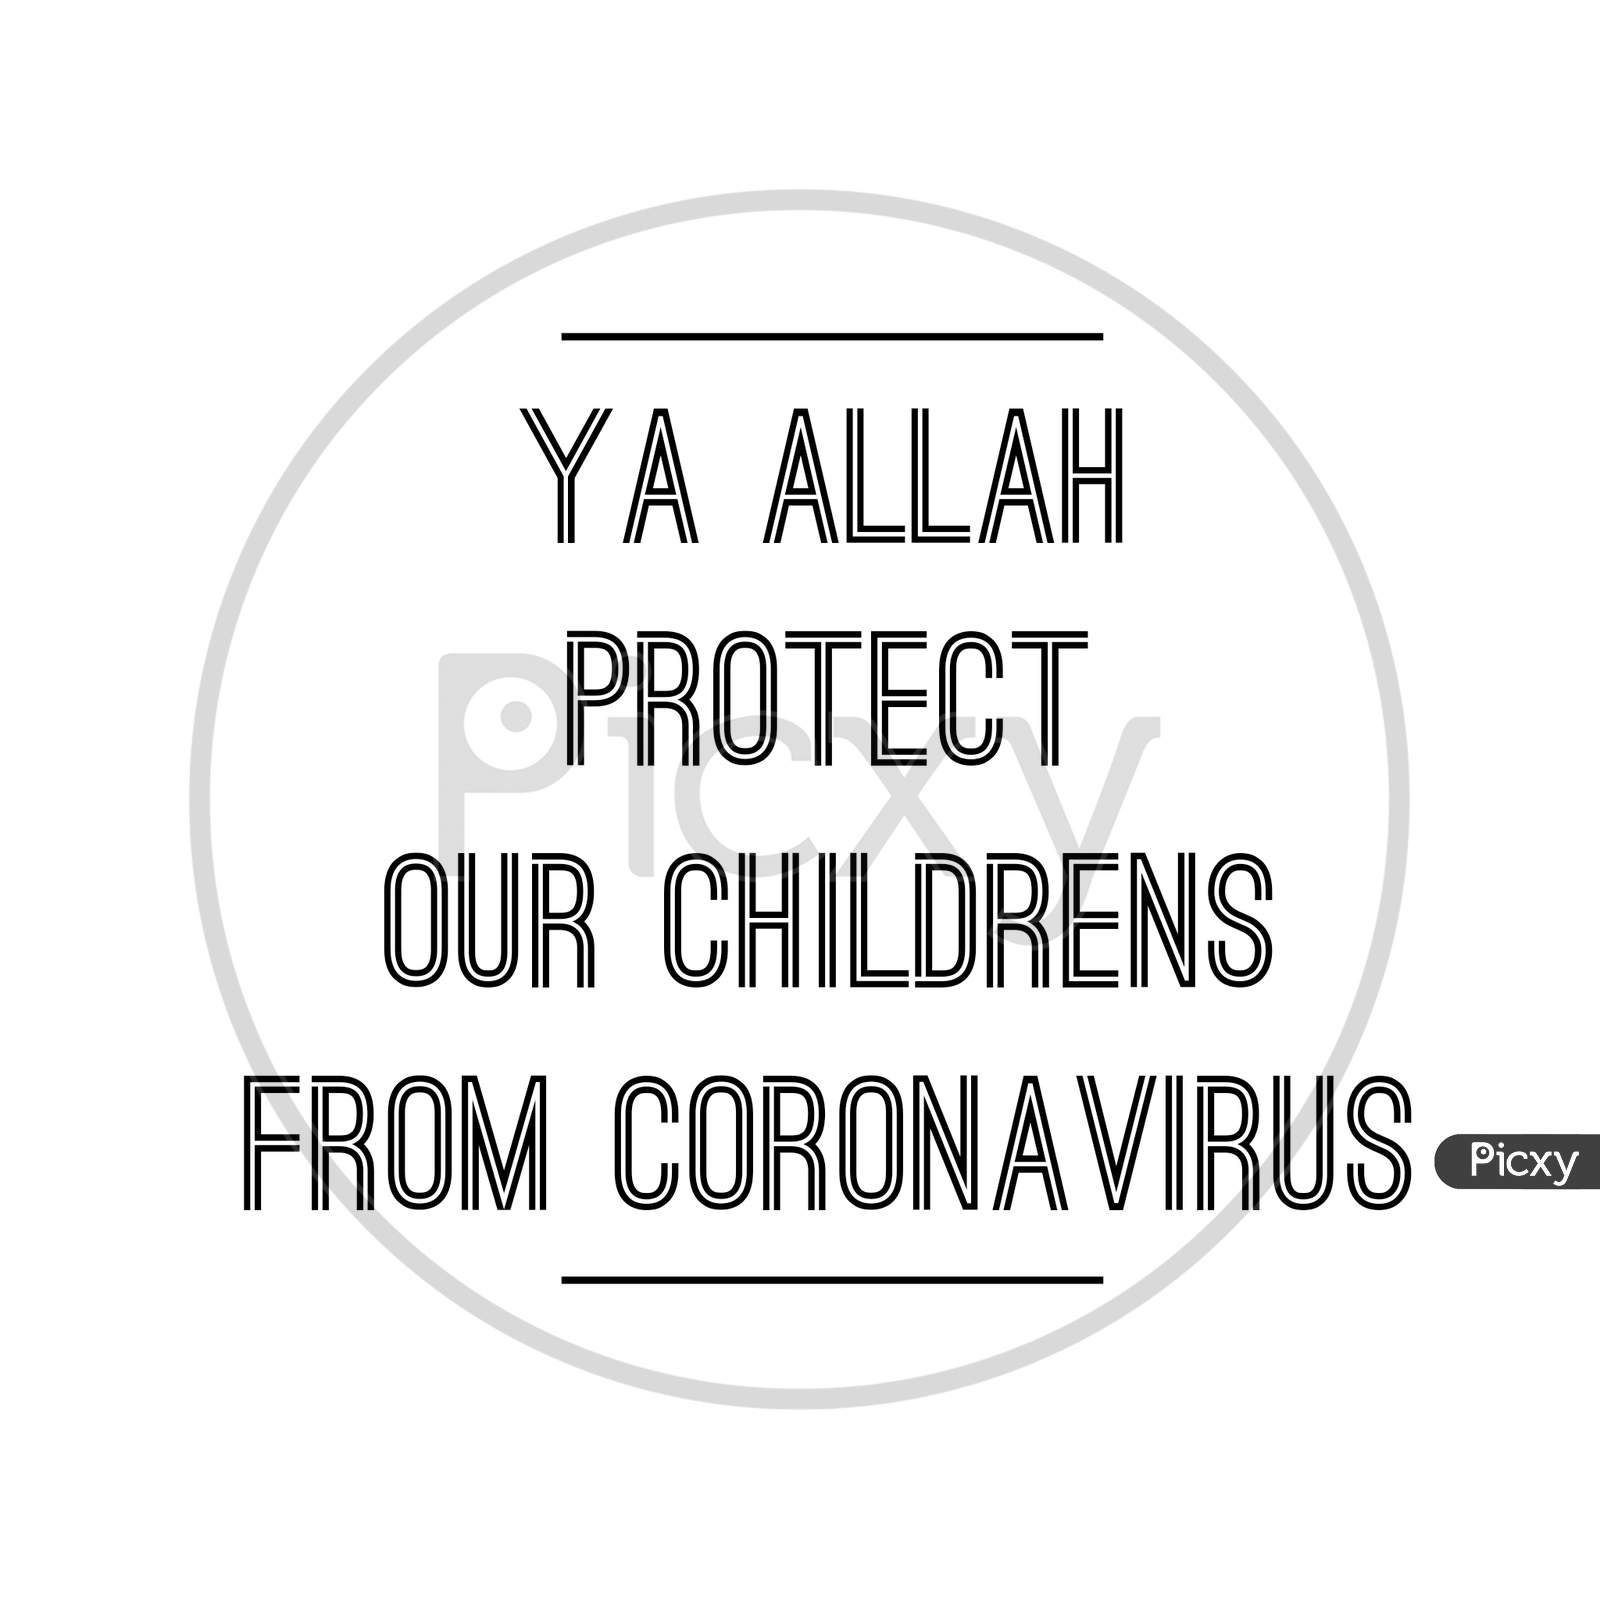 Image With A Text "Ya Allah Protect Our Children From Corona Virus"